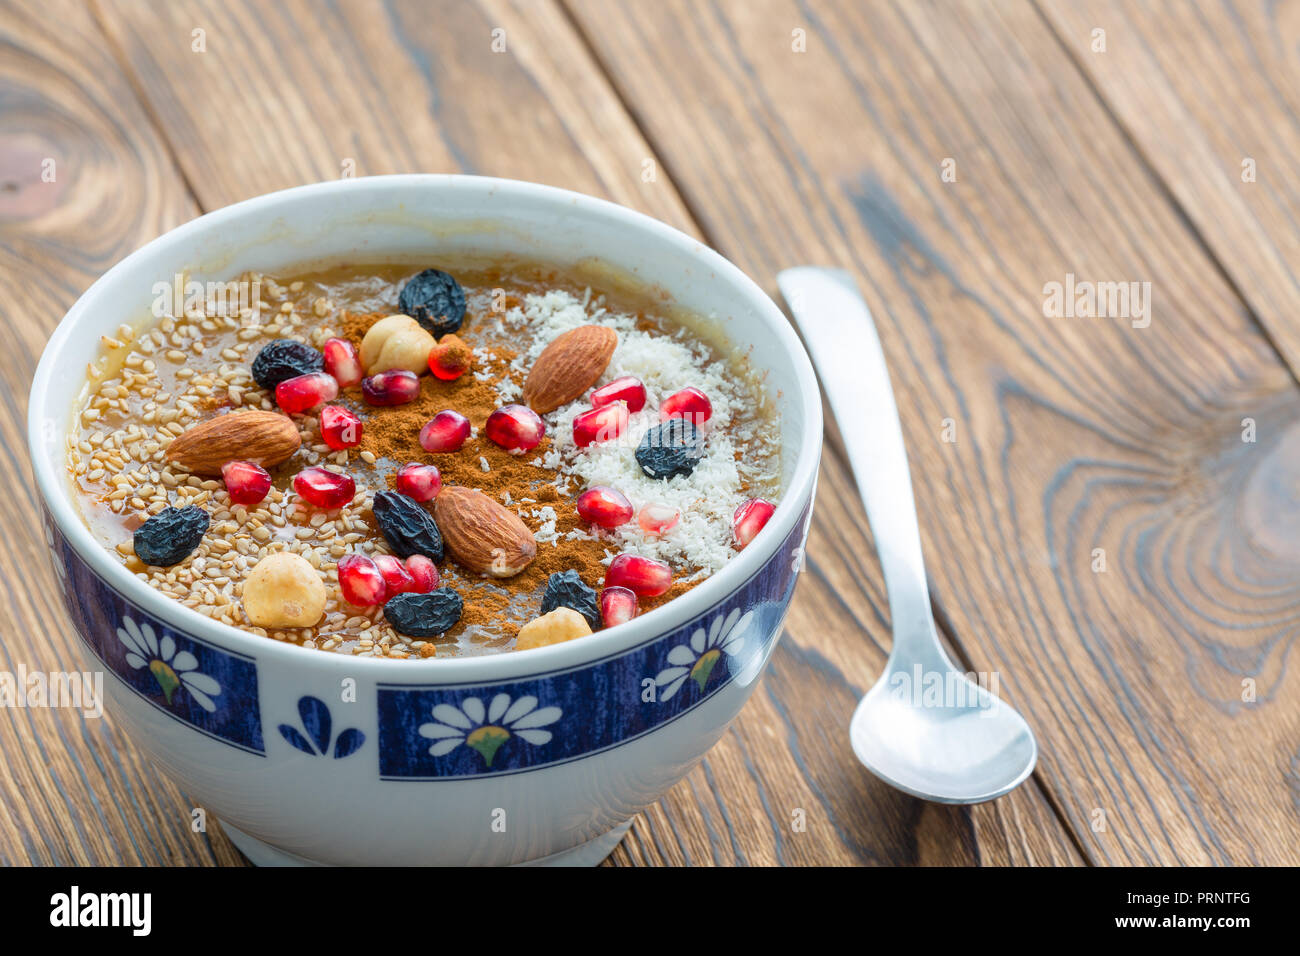 Small asure bowl of tasty cereal with nuts and fruit next to small spoon sitting on brown wood plank table Stock Photo